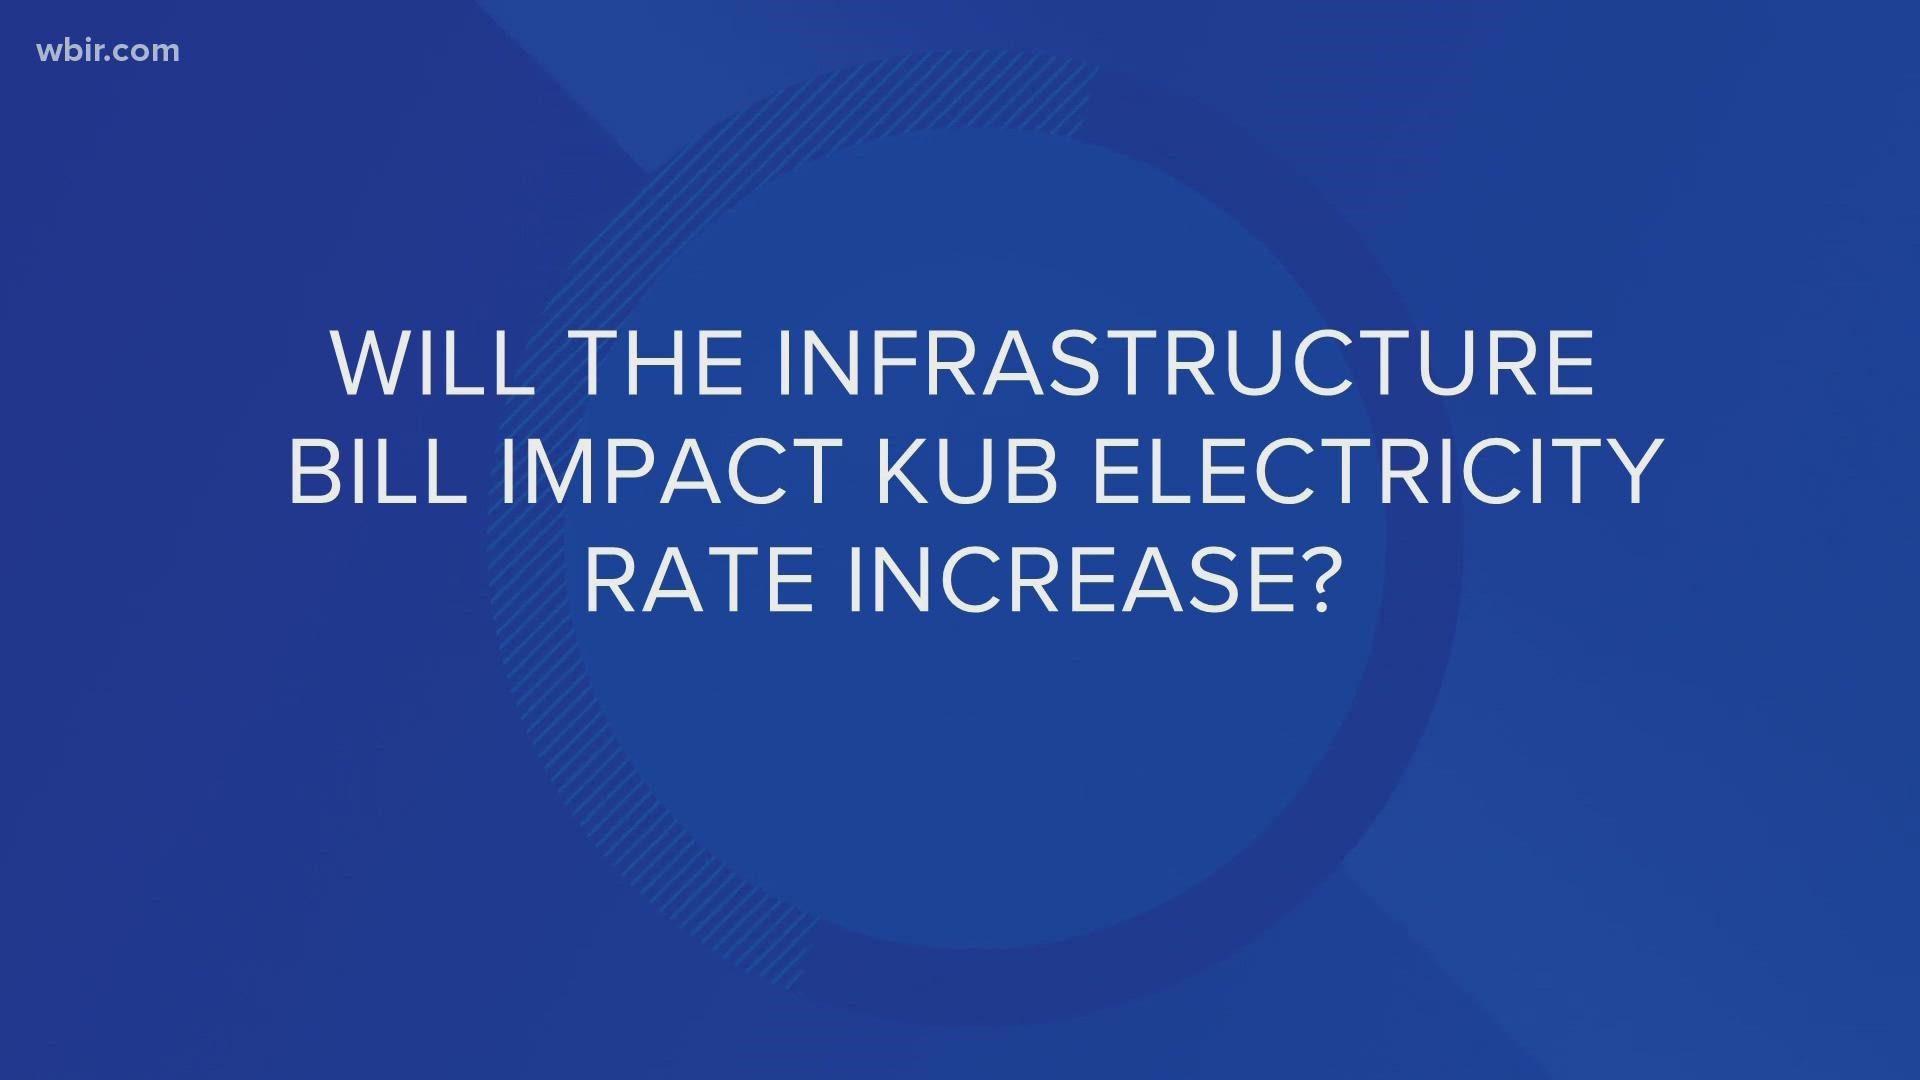 KUB said it is monitoring the infrastructure bill closely and said its rollout of municipal internet is on track.